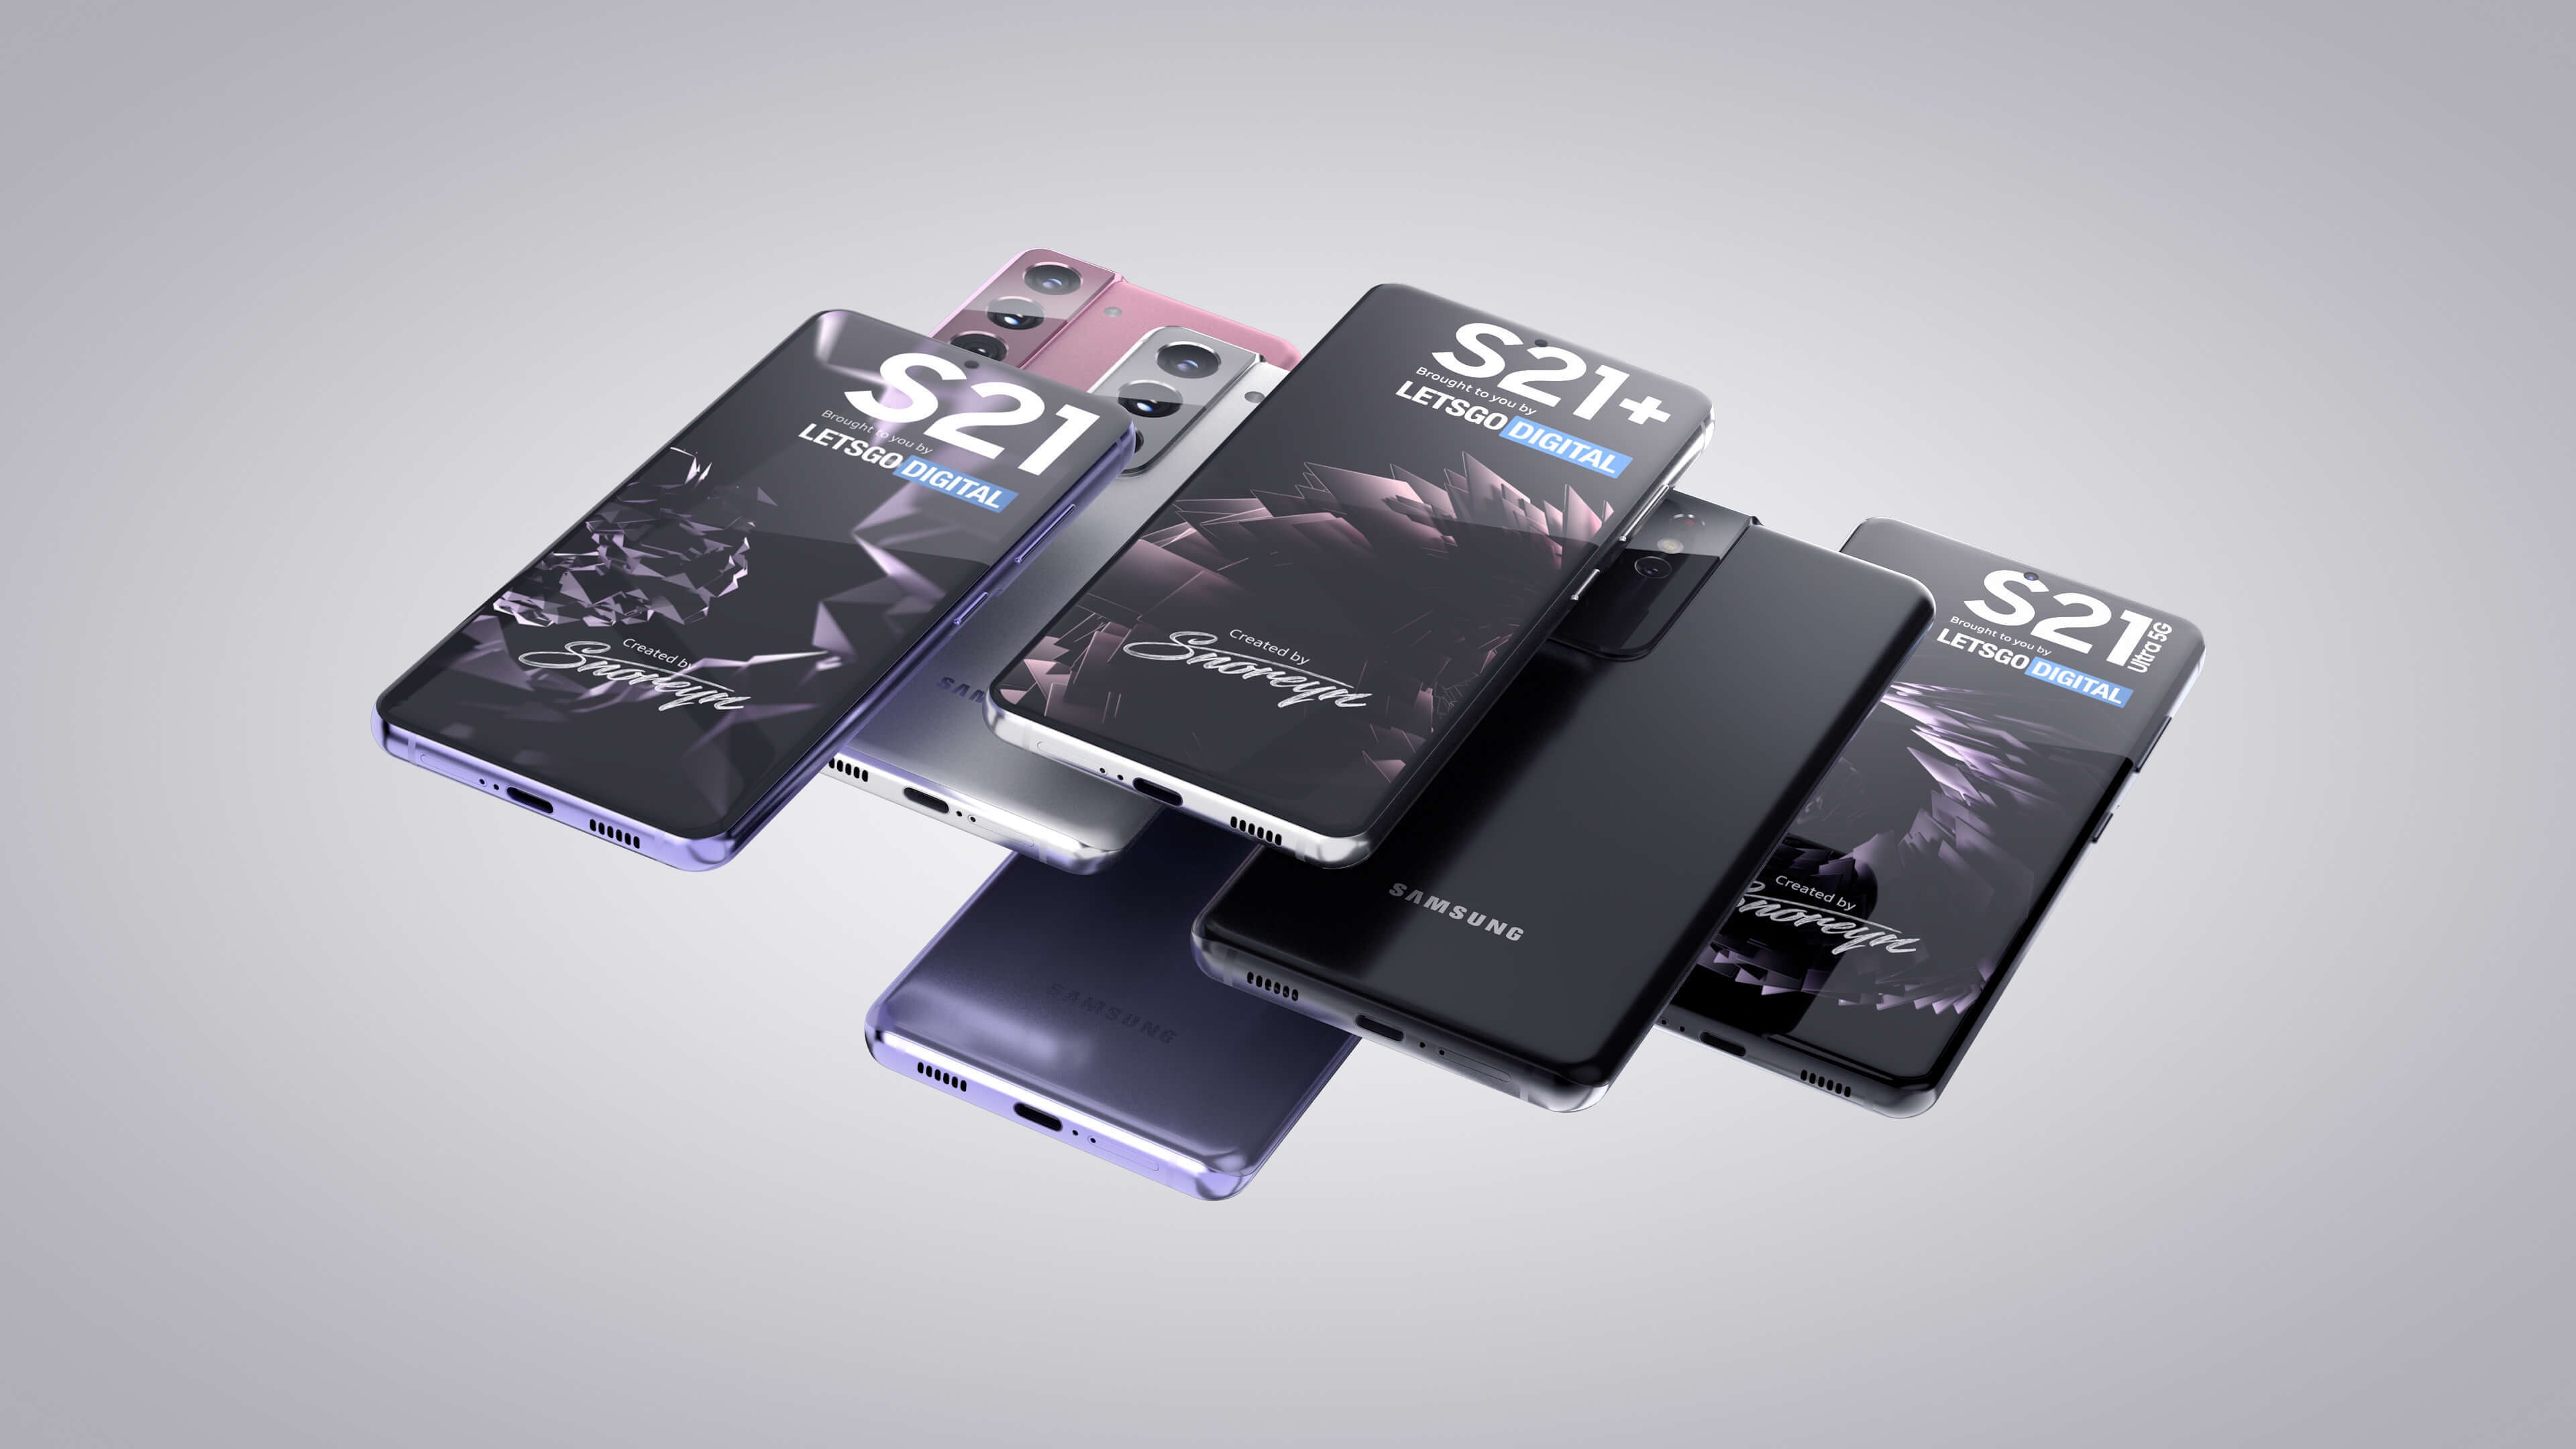 Samsung Galaxy S21 series concept render - Samsung teases 2021 plans: cheaper foldables, early S21 announcement, S Pen without Note